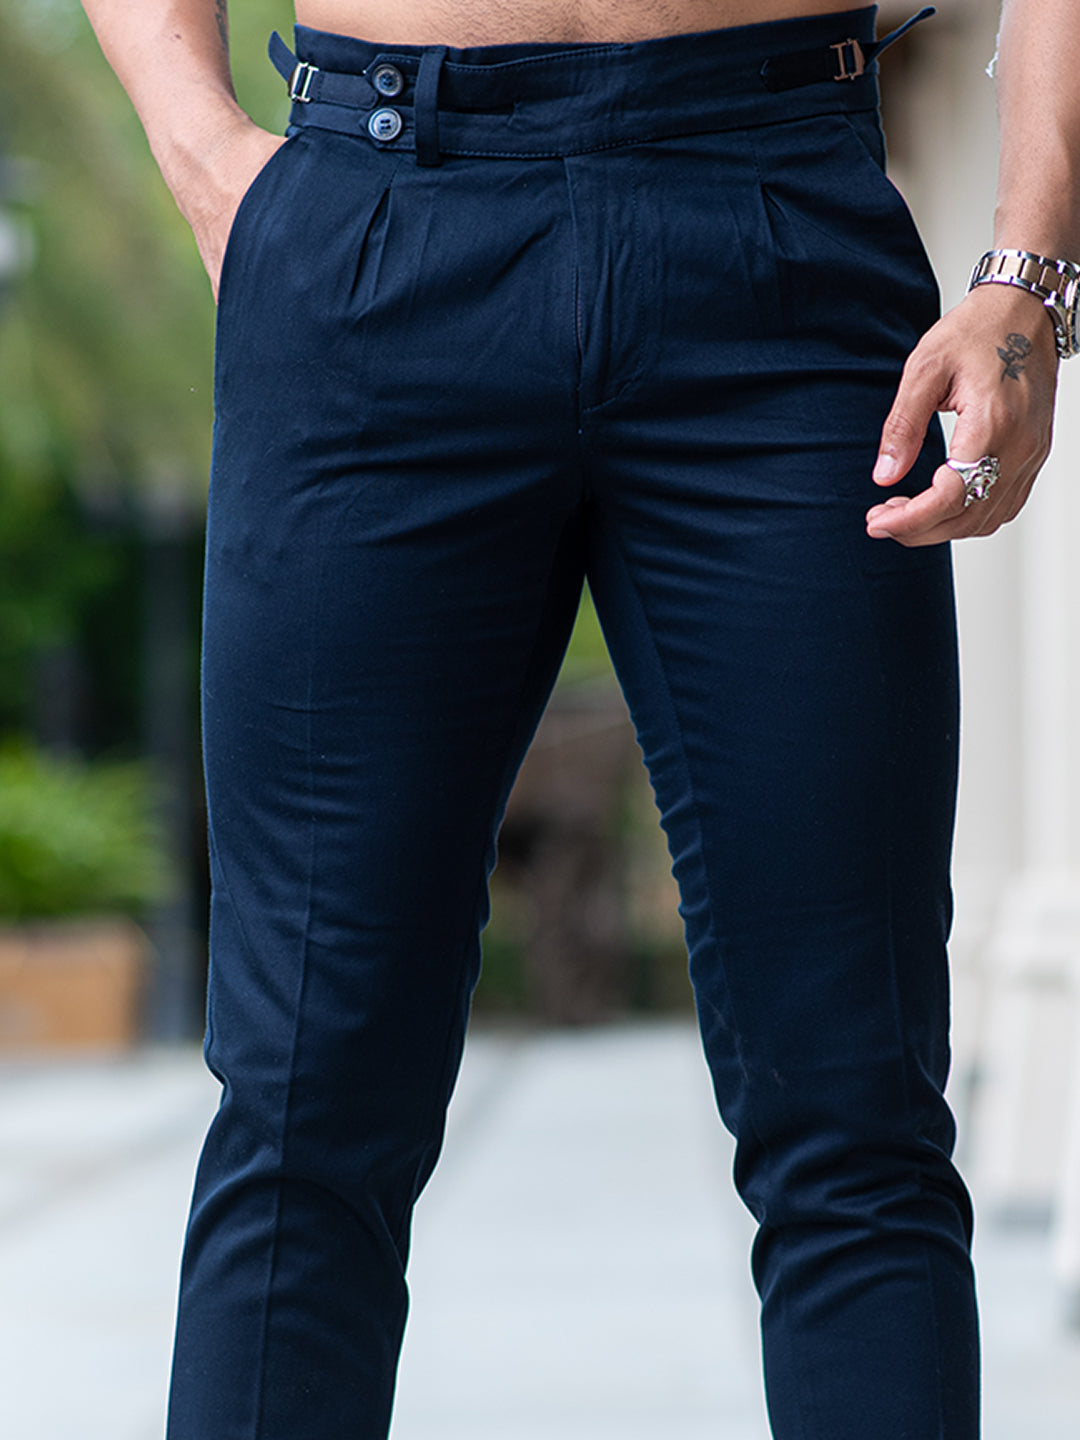 Cato Fashions | Cato Navy Trouser Pants